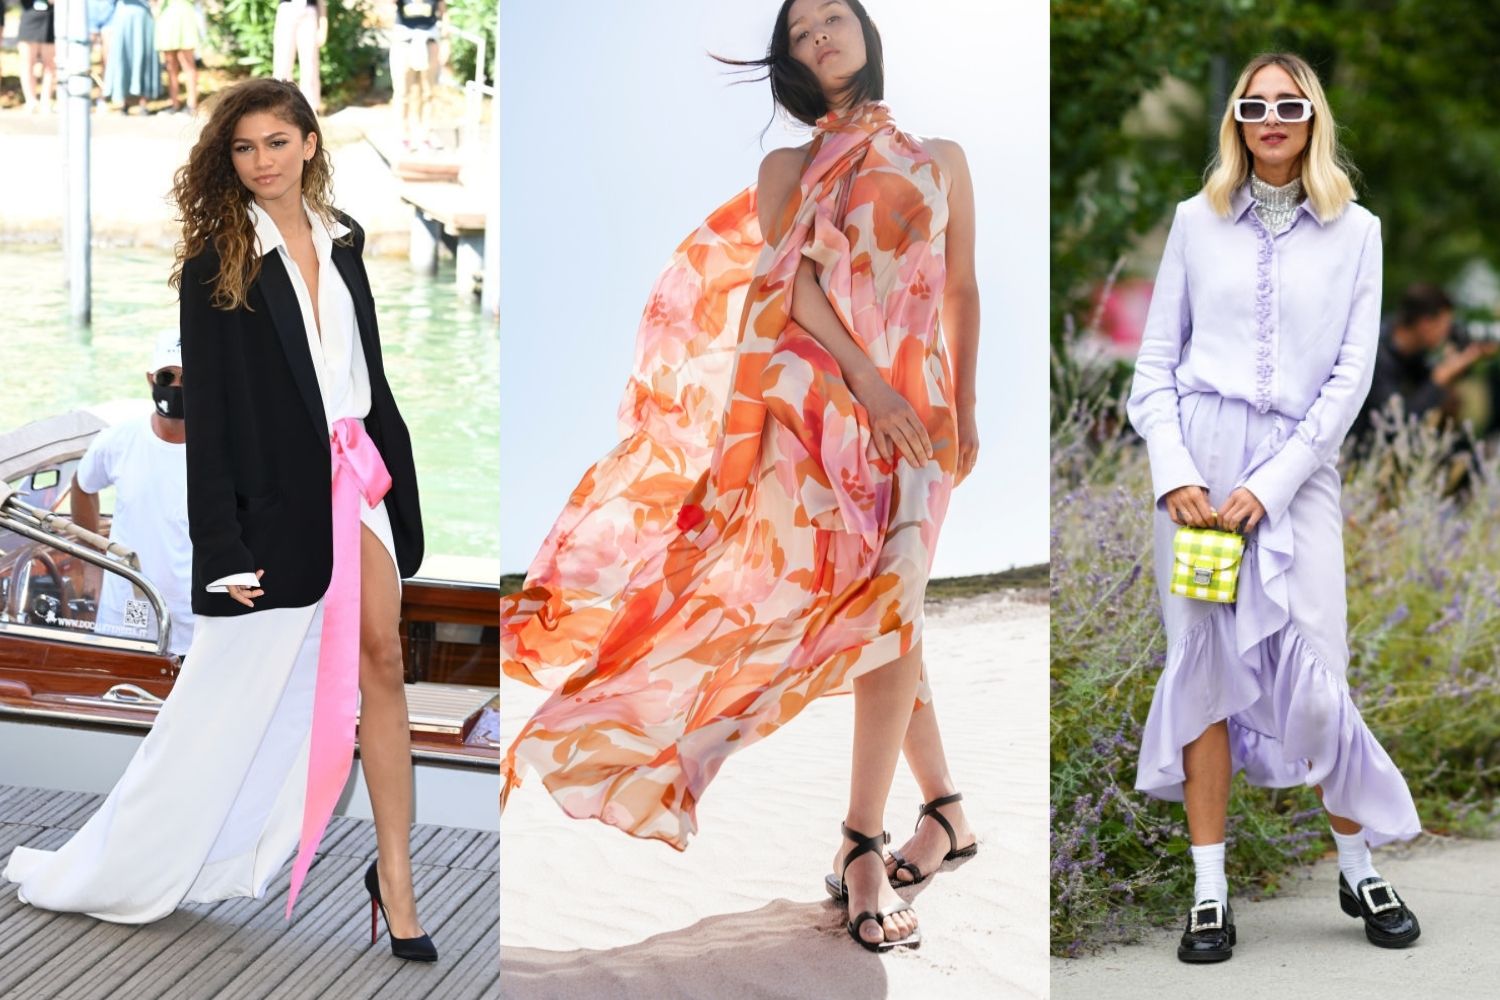 Springspiration: Five Must-Have New-Season Styles To Celebrate The Sun